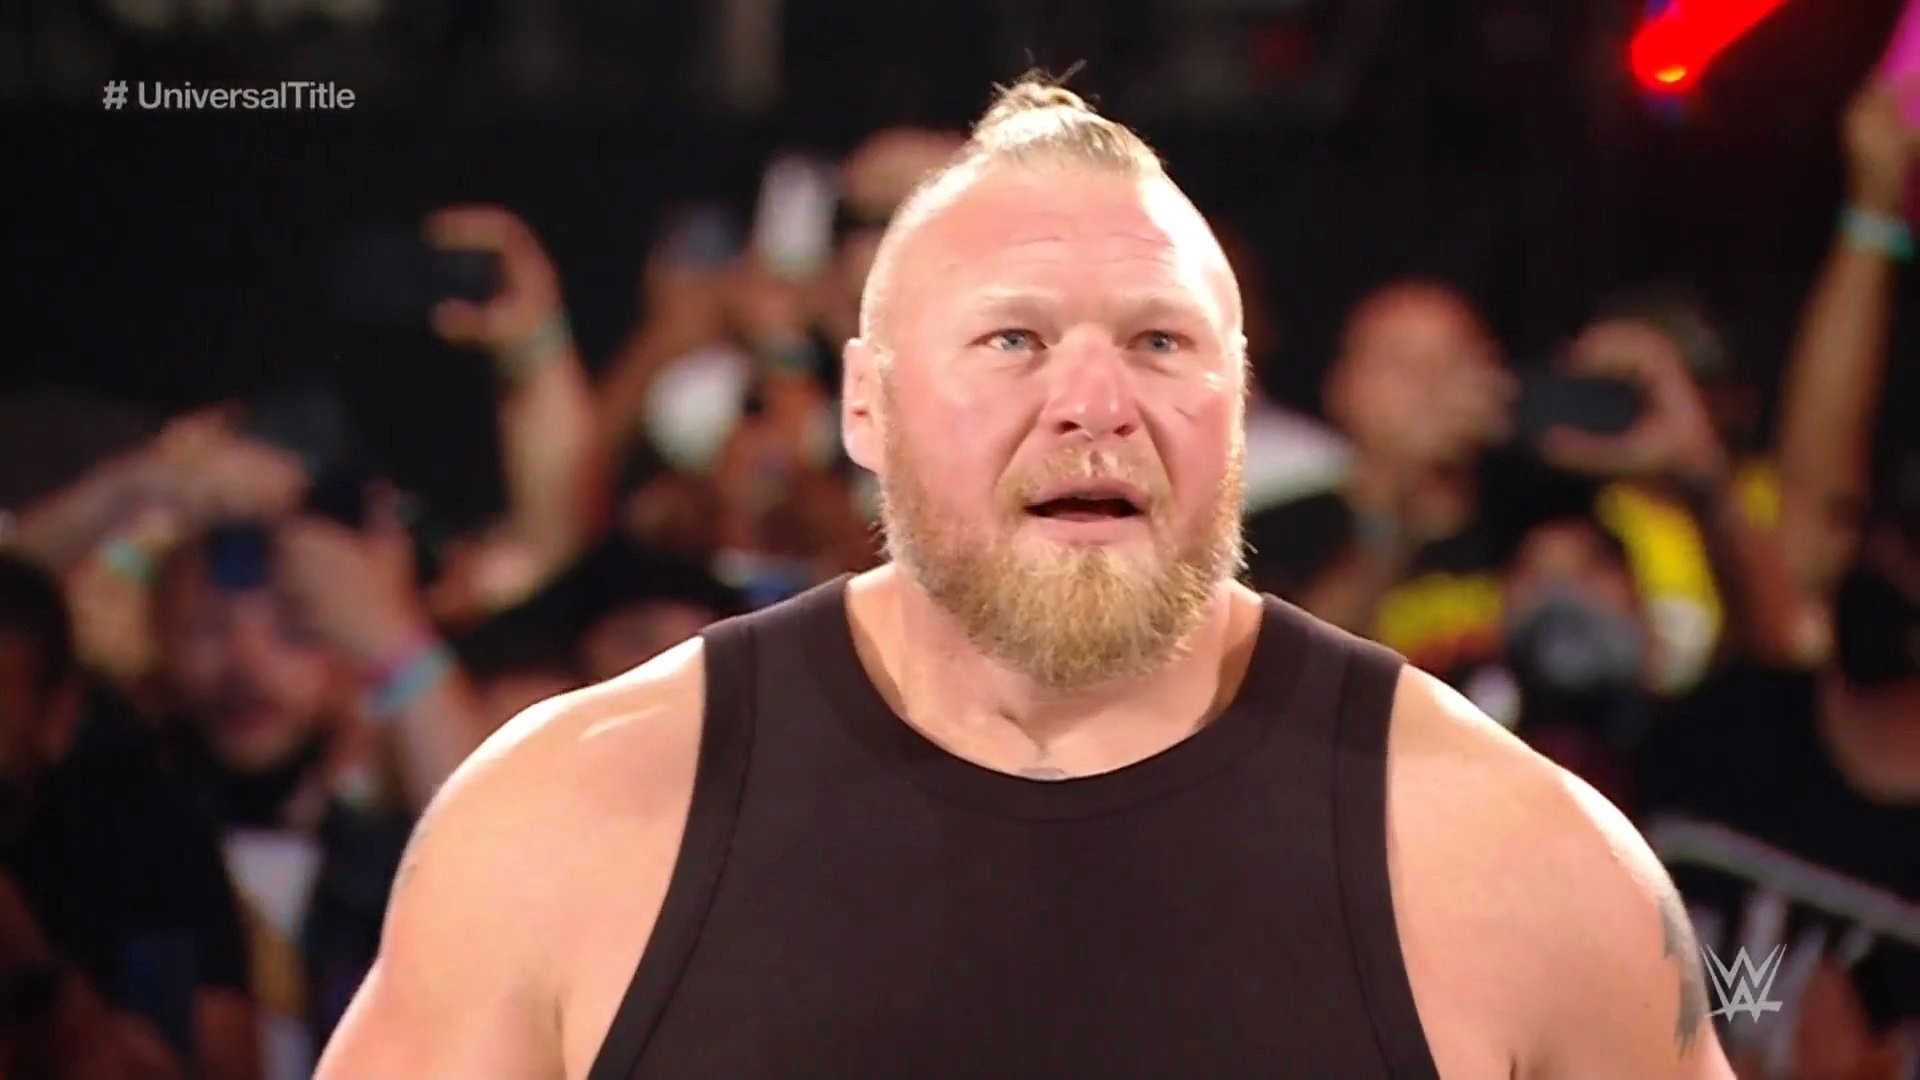 WWE’s Brock Lesnar looks more ripped than ever as beast returns at SummerSlam sporting full beard and ponytail